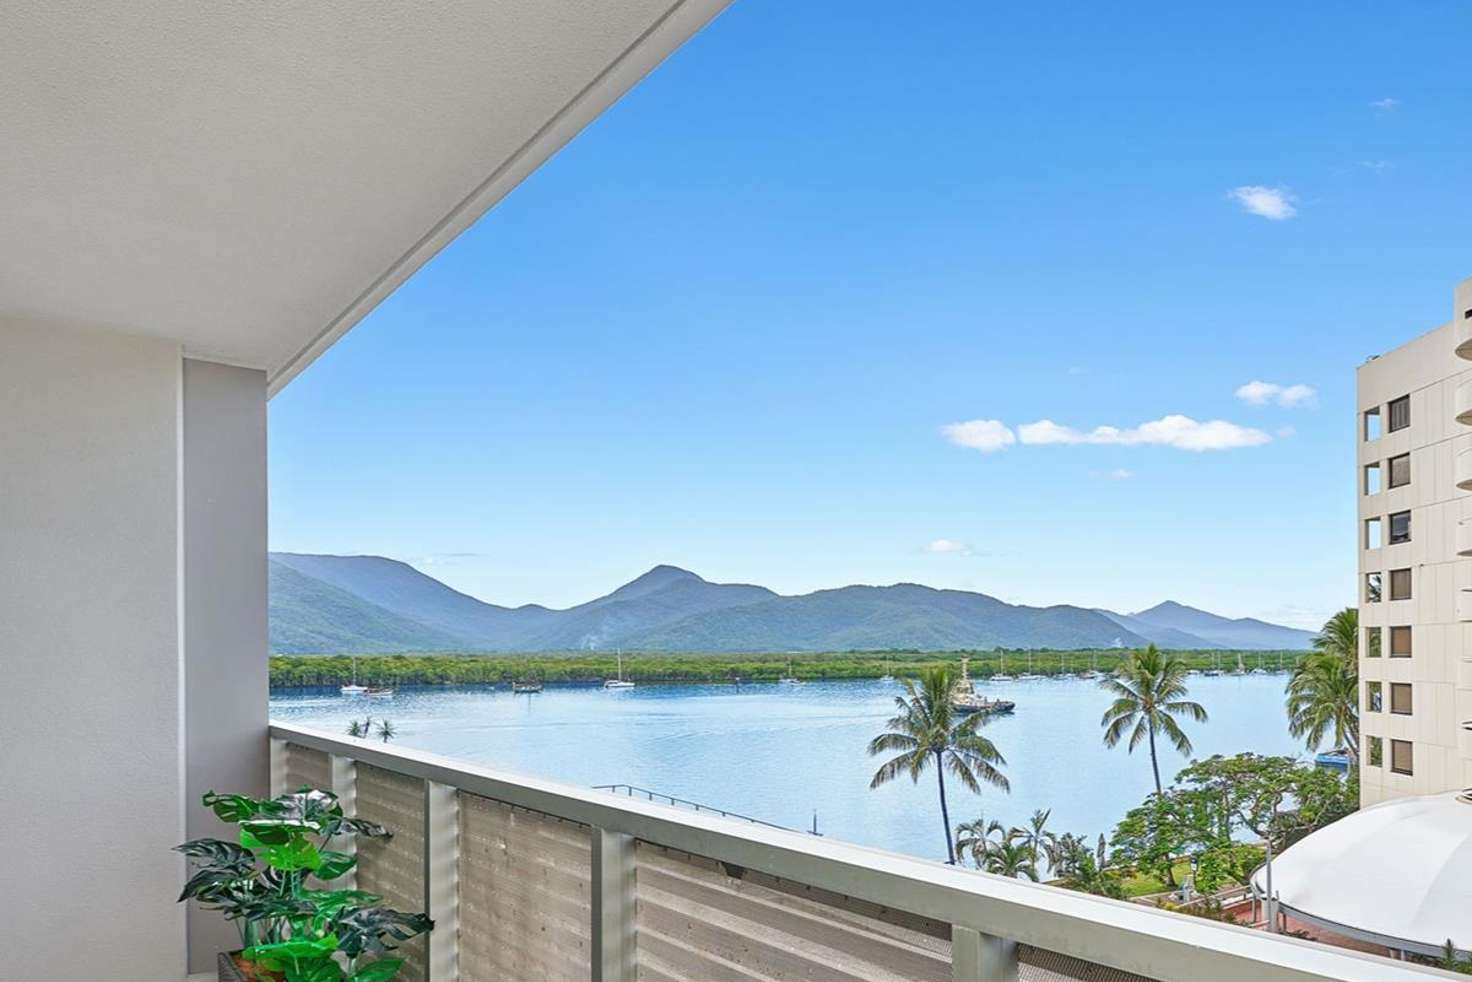 Main view of Homely apartment listing, 503/1 Marlin Pde, Cairns City QLD 4870